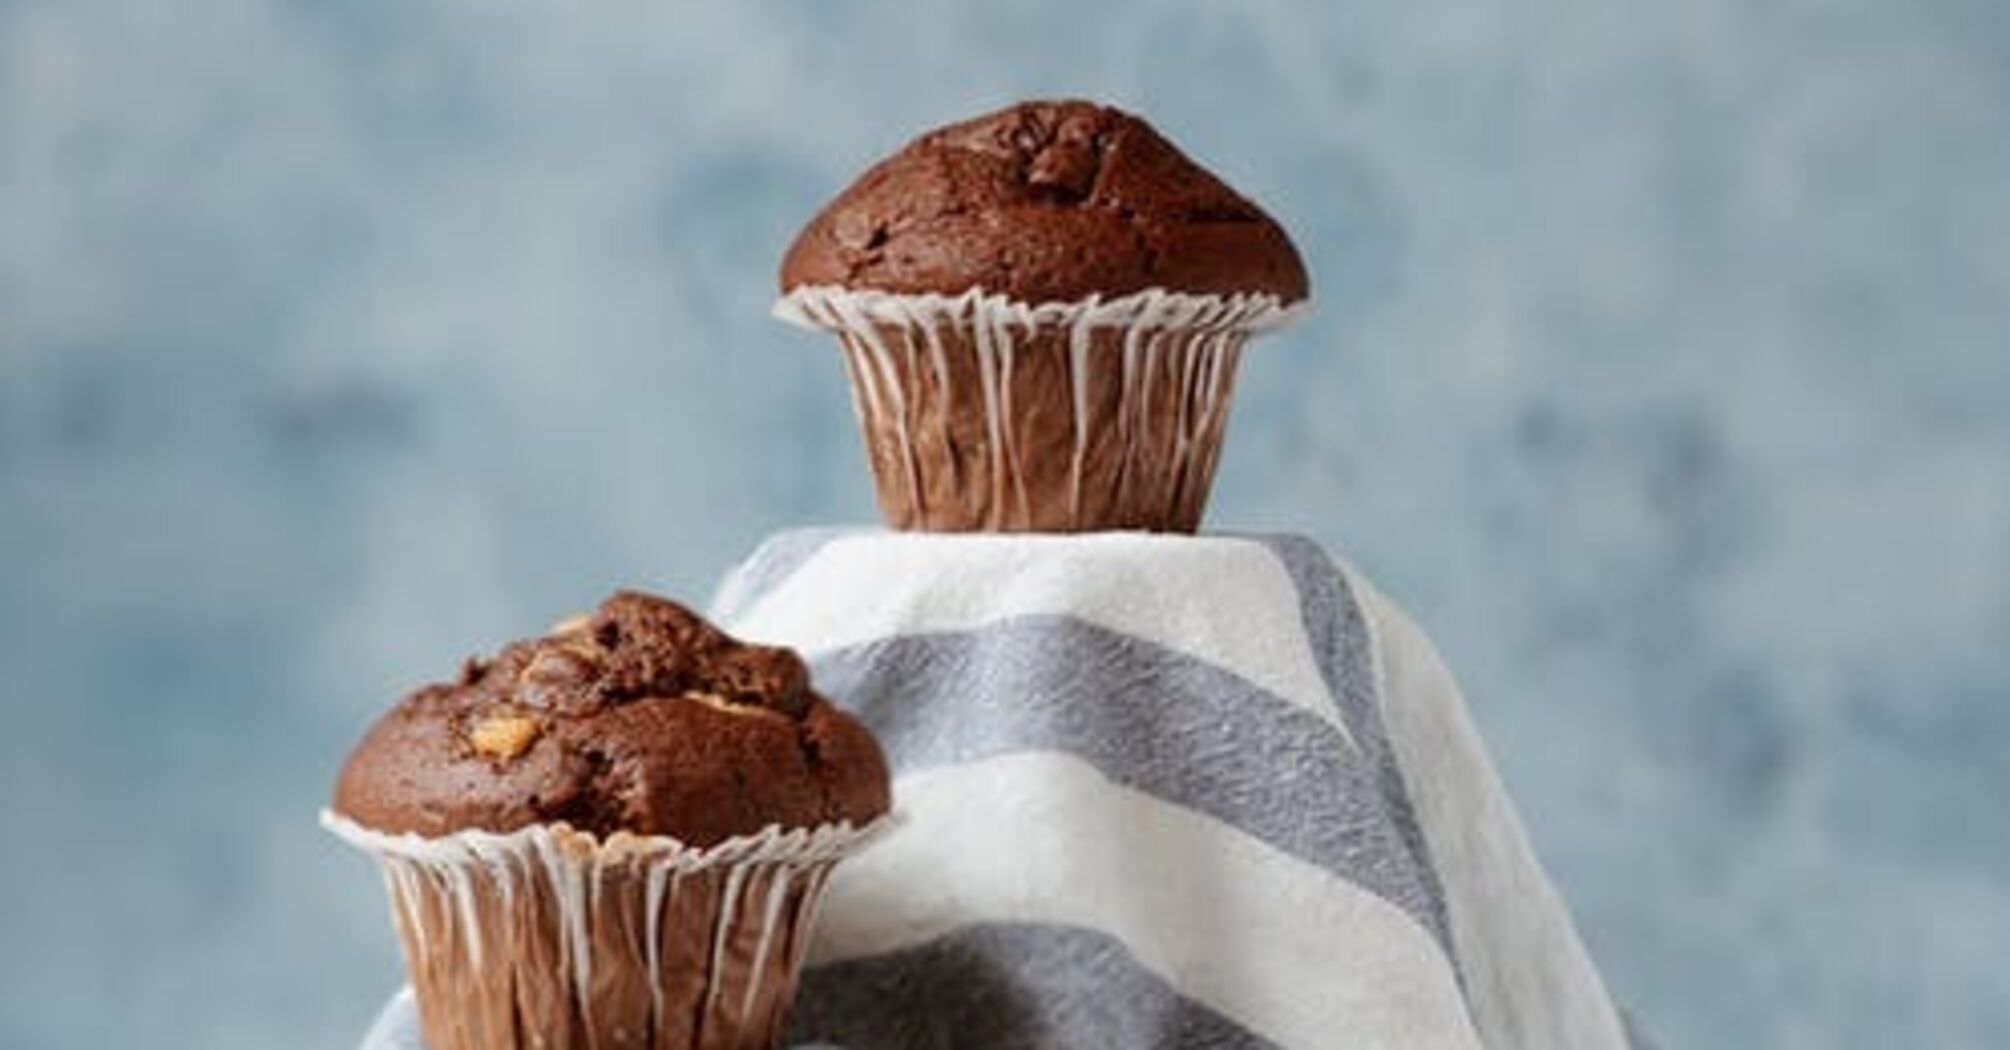 How to make muffins in a slow cooker: a simple dessert idea